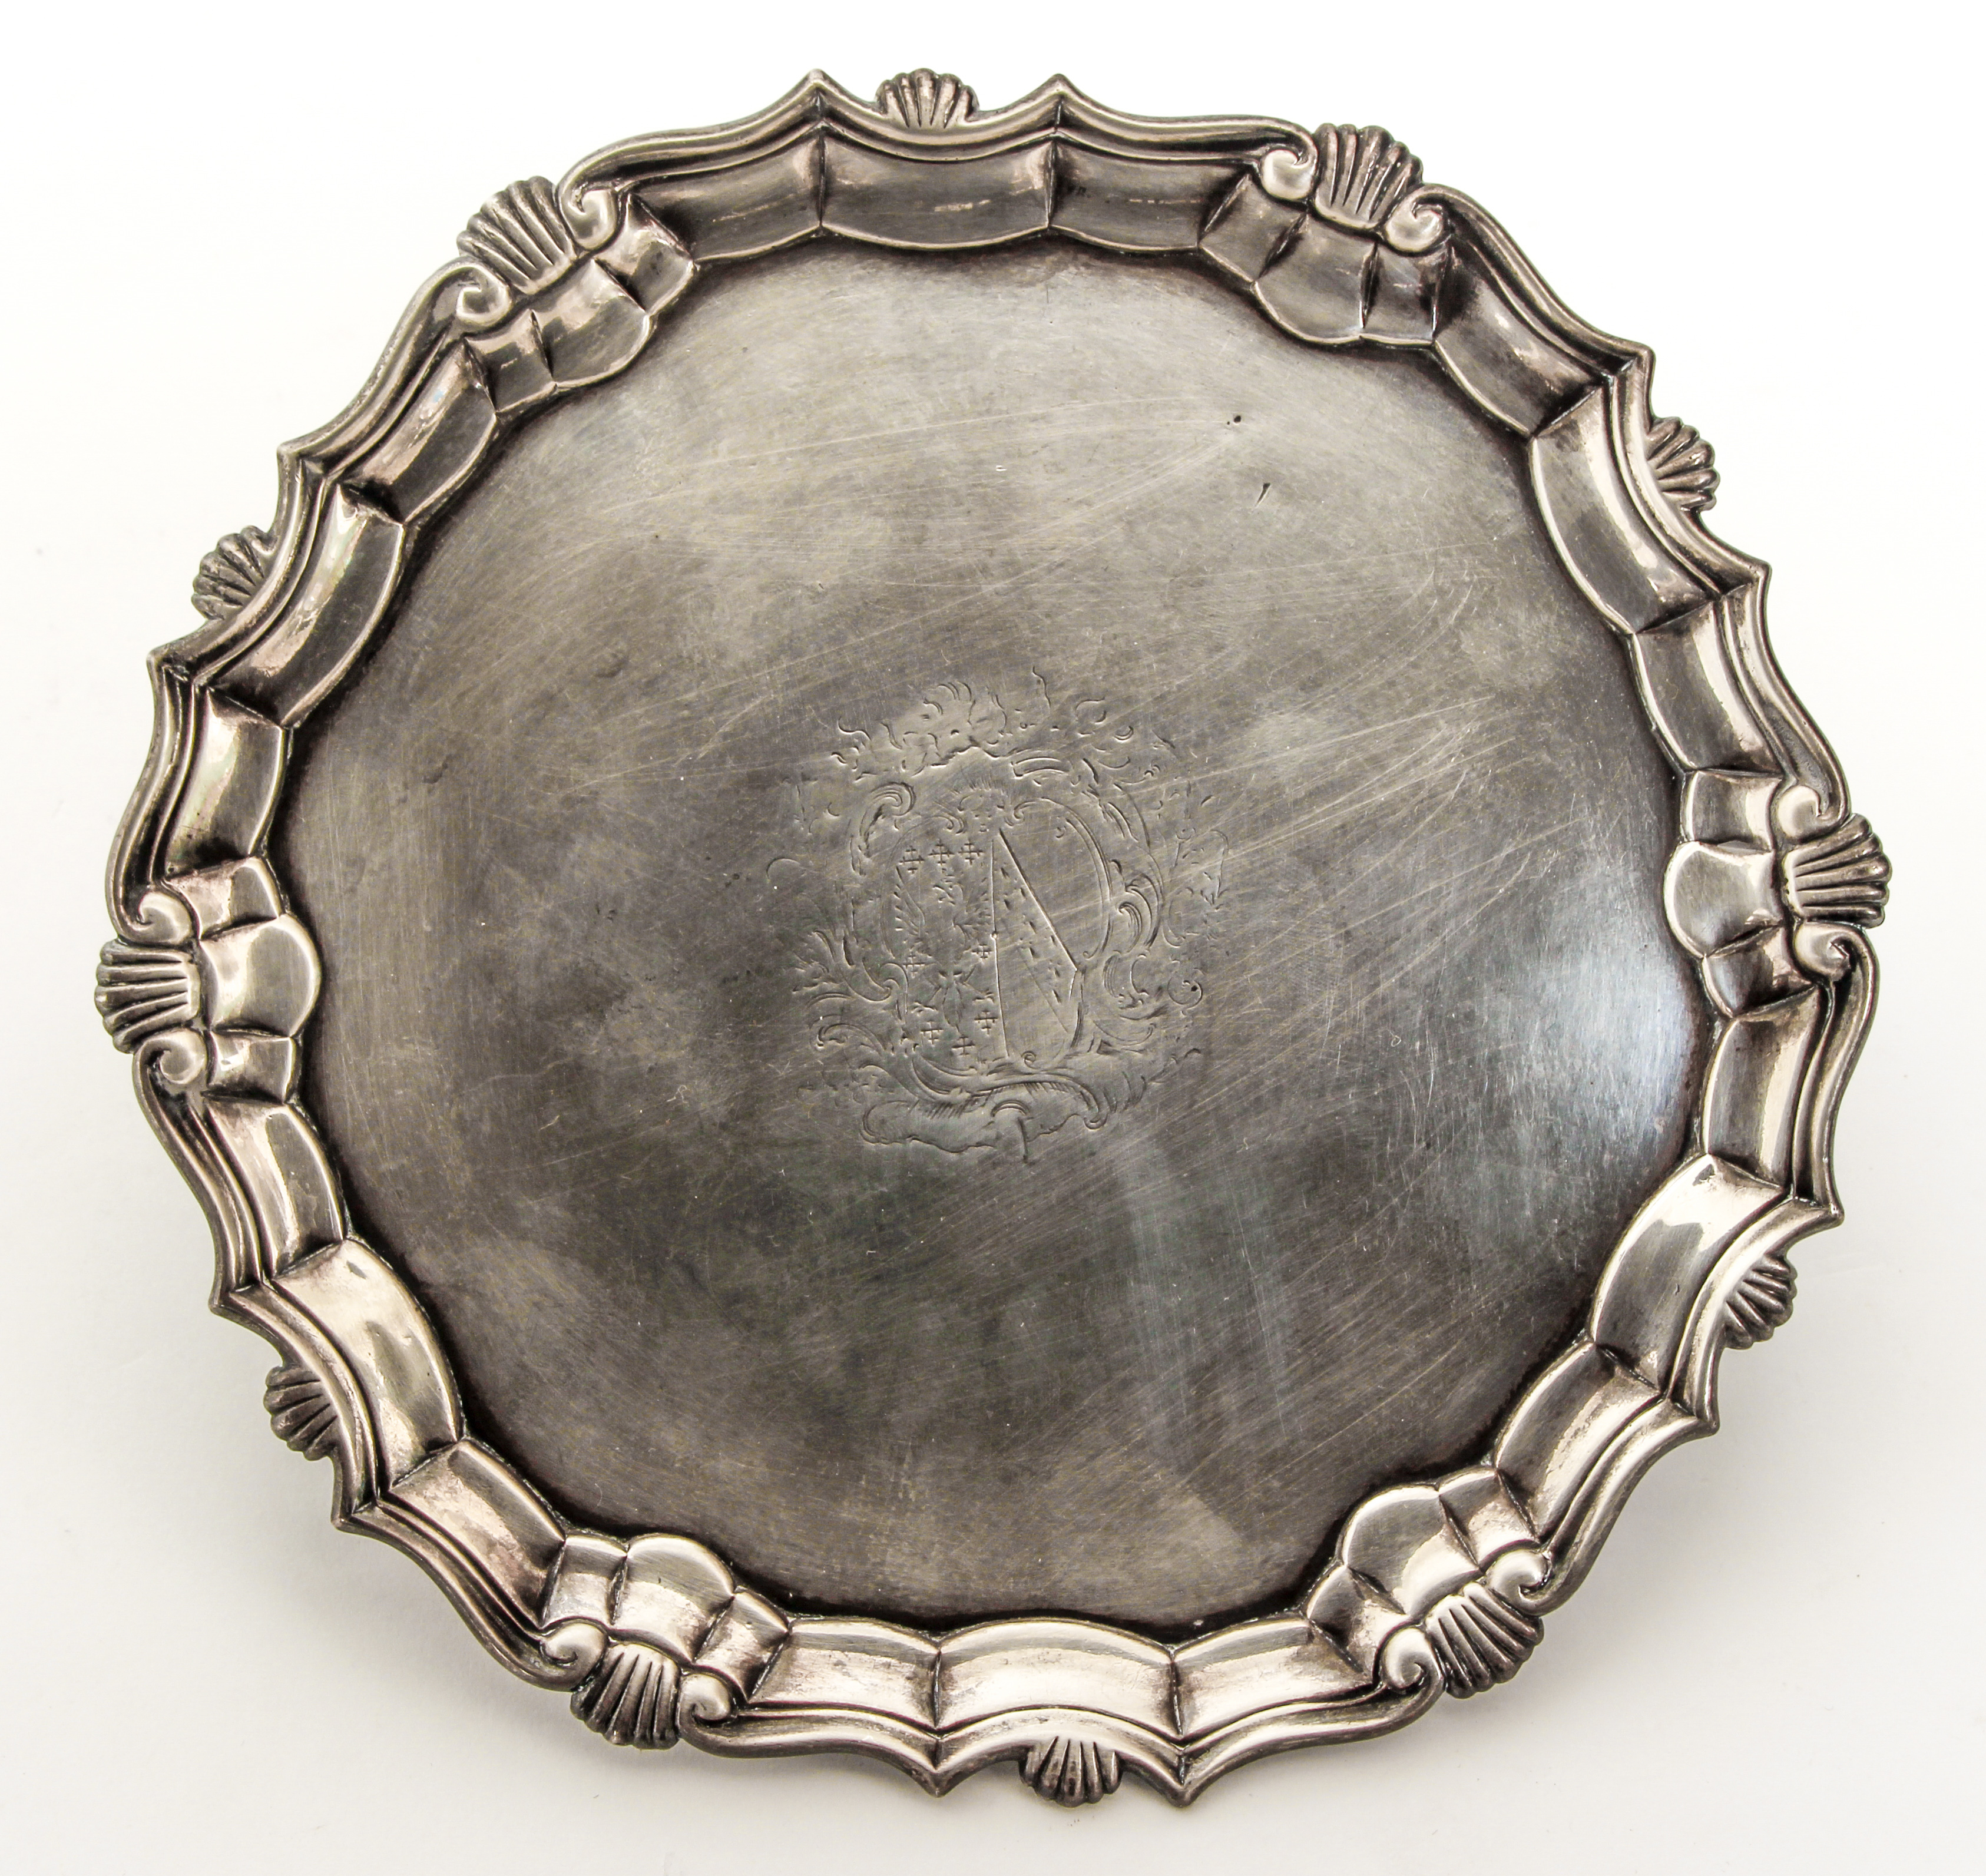 Richard Beale Silver Salver 1742 - Image 3 of 5